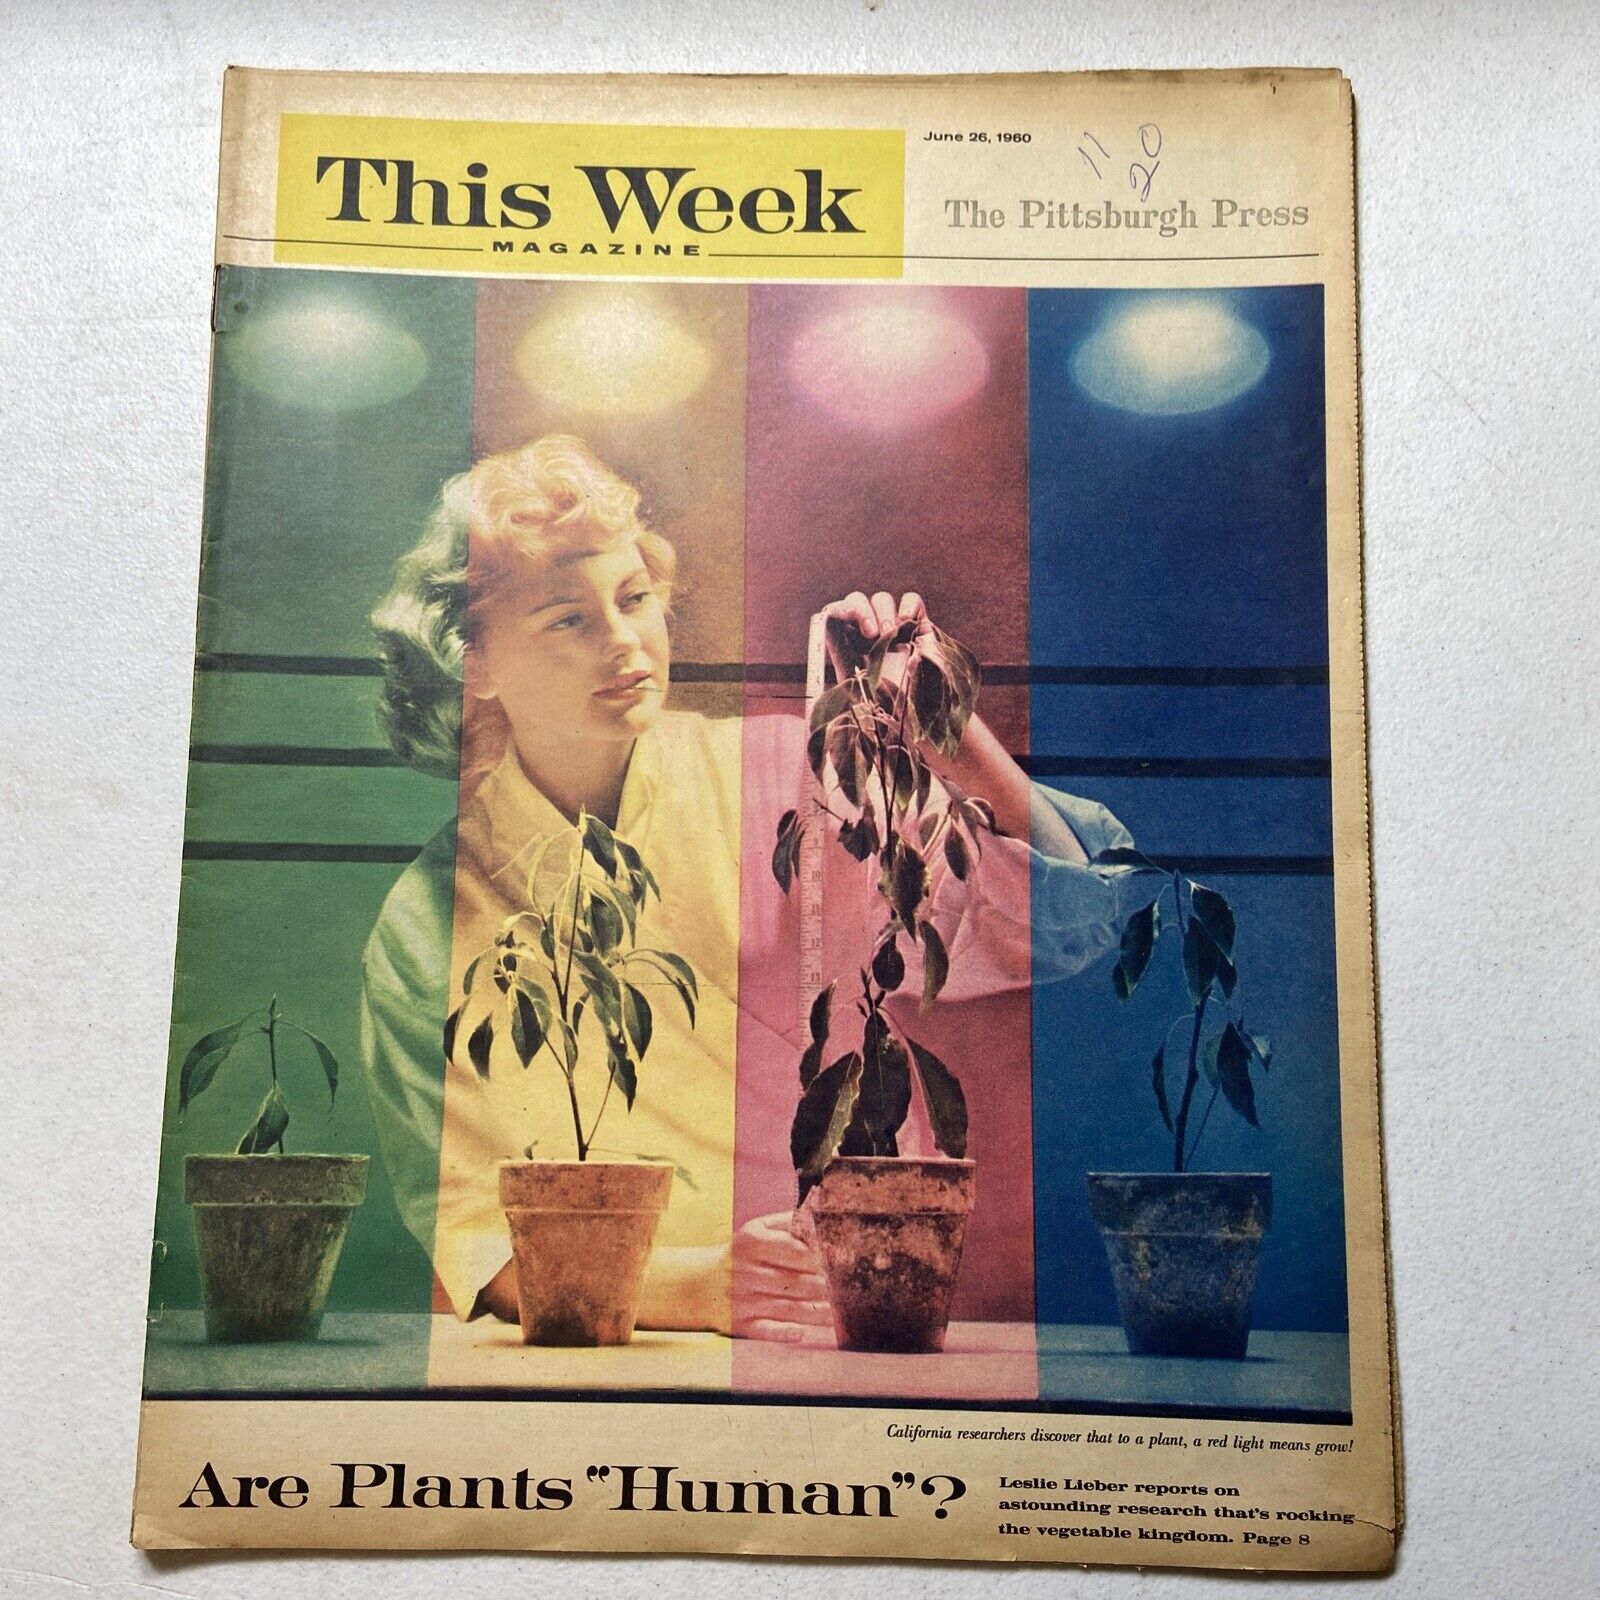 THIS WEEK Magazine - June 25, 1960 - Are Plants Human, Tammy Grimes, Vtg Chev Ad